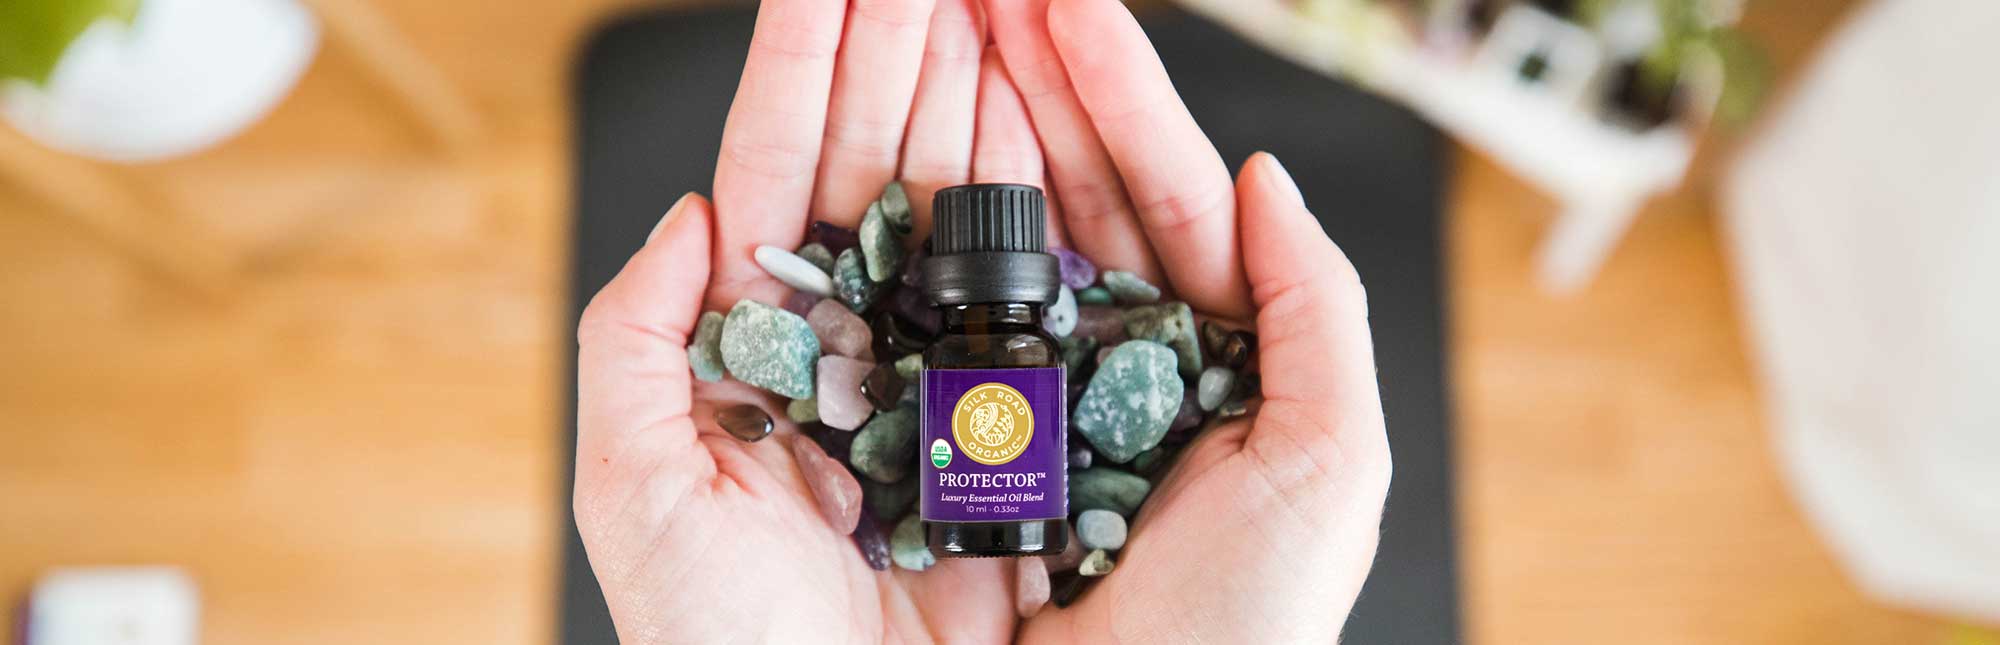 Vitality Extracts Frankincense Essential Oil for Pain Relief - 30ml,  Boswellia Serrata, Aromatherapy, Skin Care, Natural Calm, Stress Relief,  Yoga